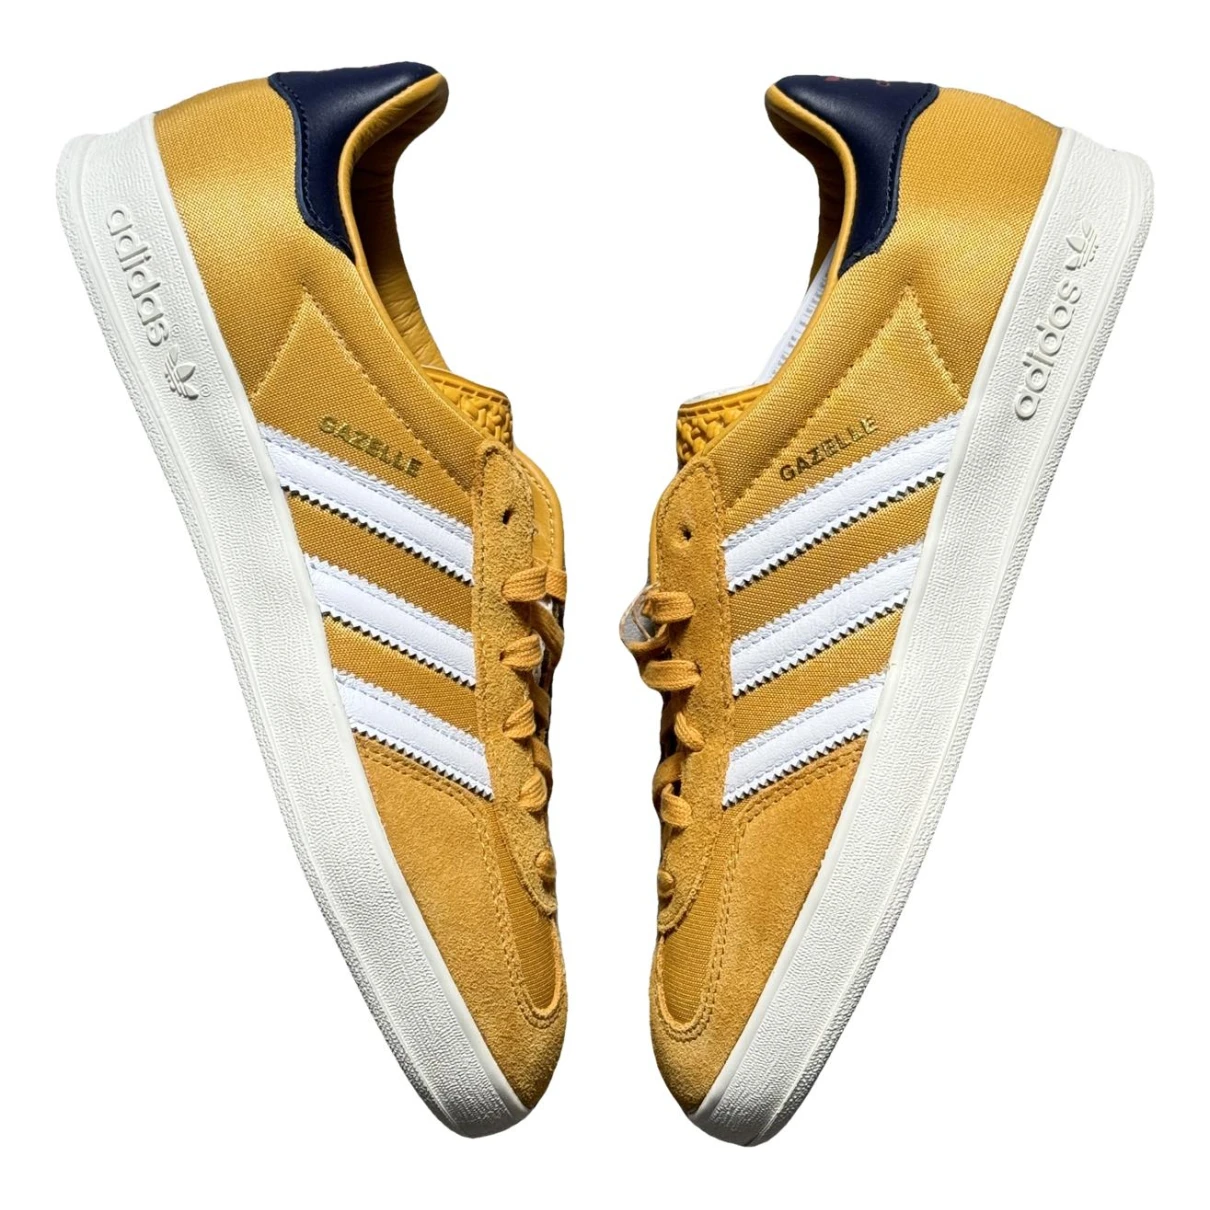 Pre-owned Adidas Originals Gazelle Cloth Trainers In Yellow